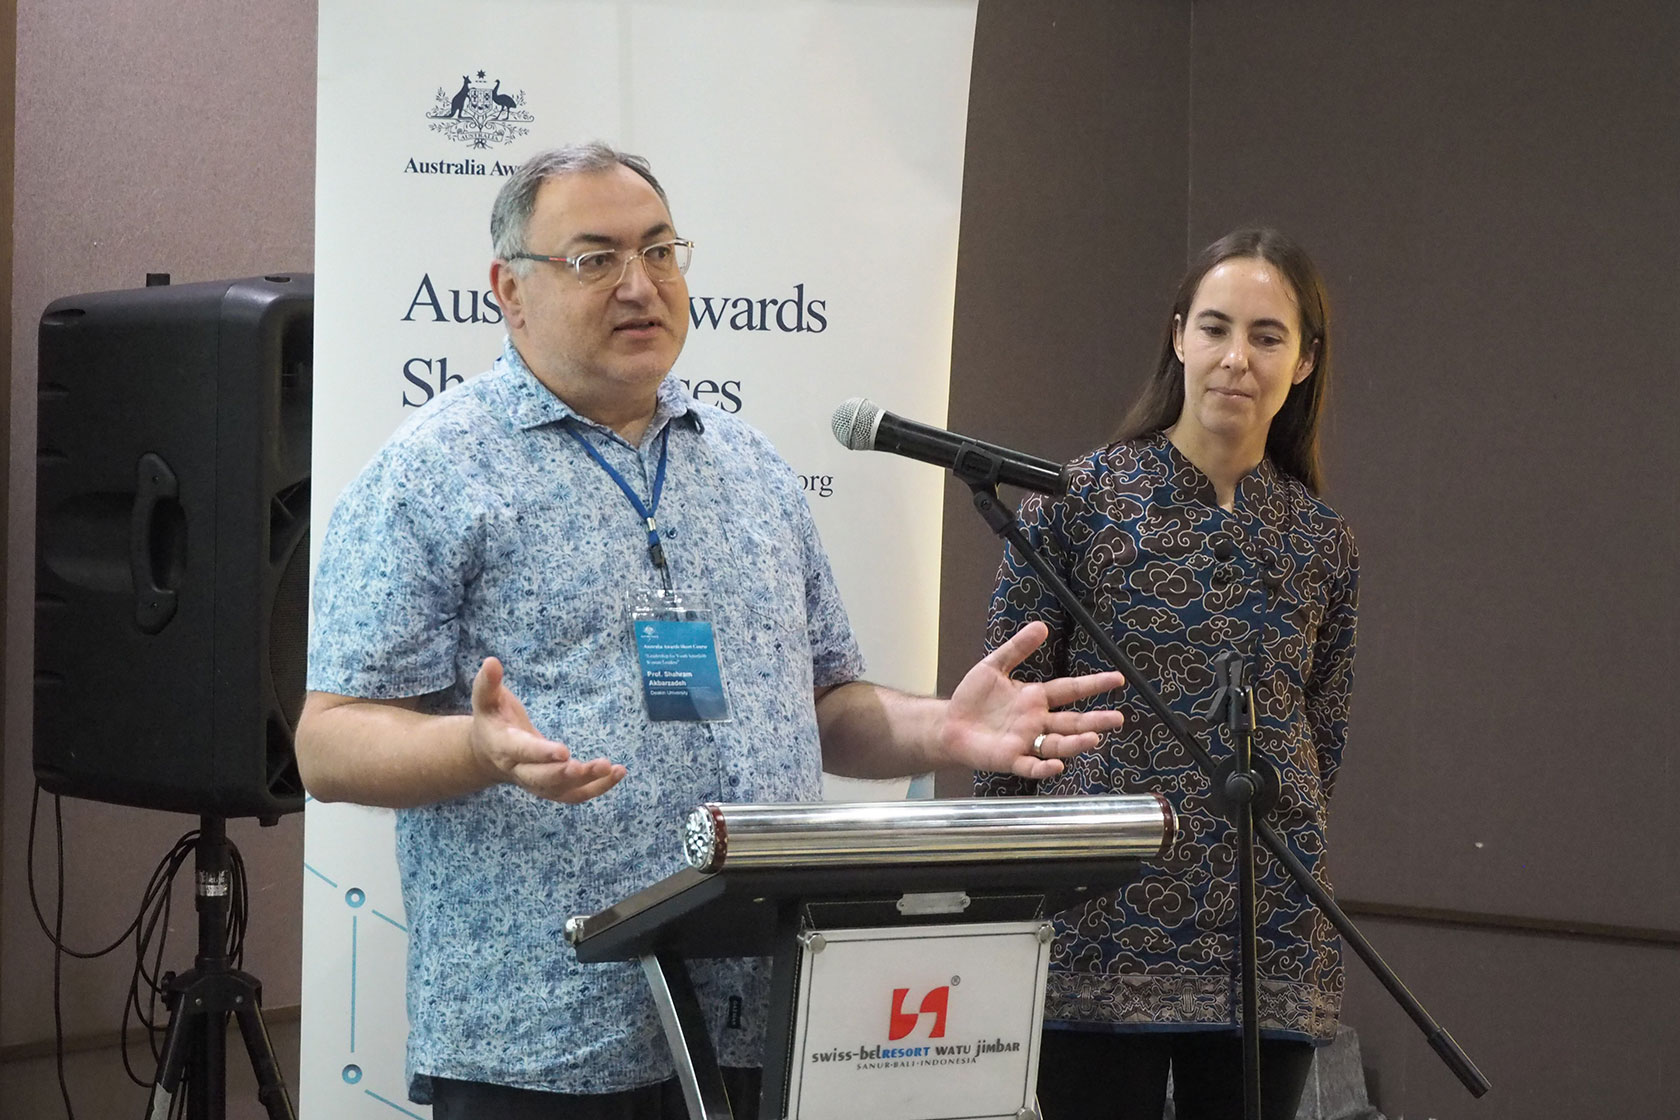 Professor Shahram Akbarzadeh, the Course Leader, shares his reflections on the in-Australia course.